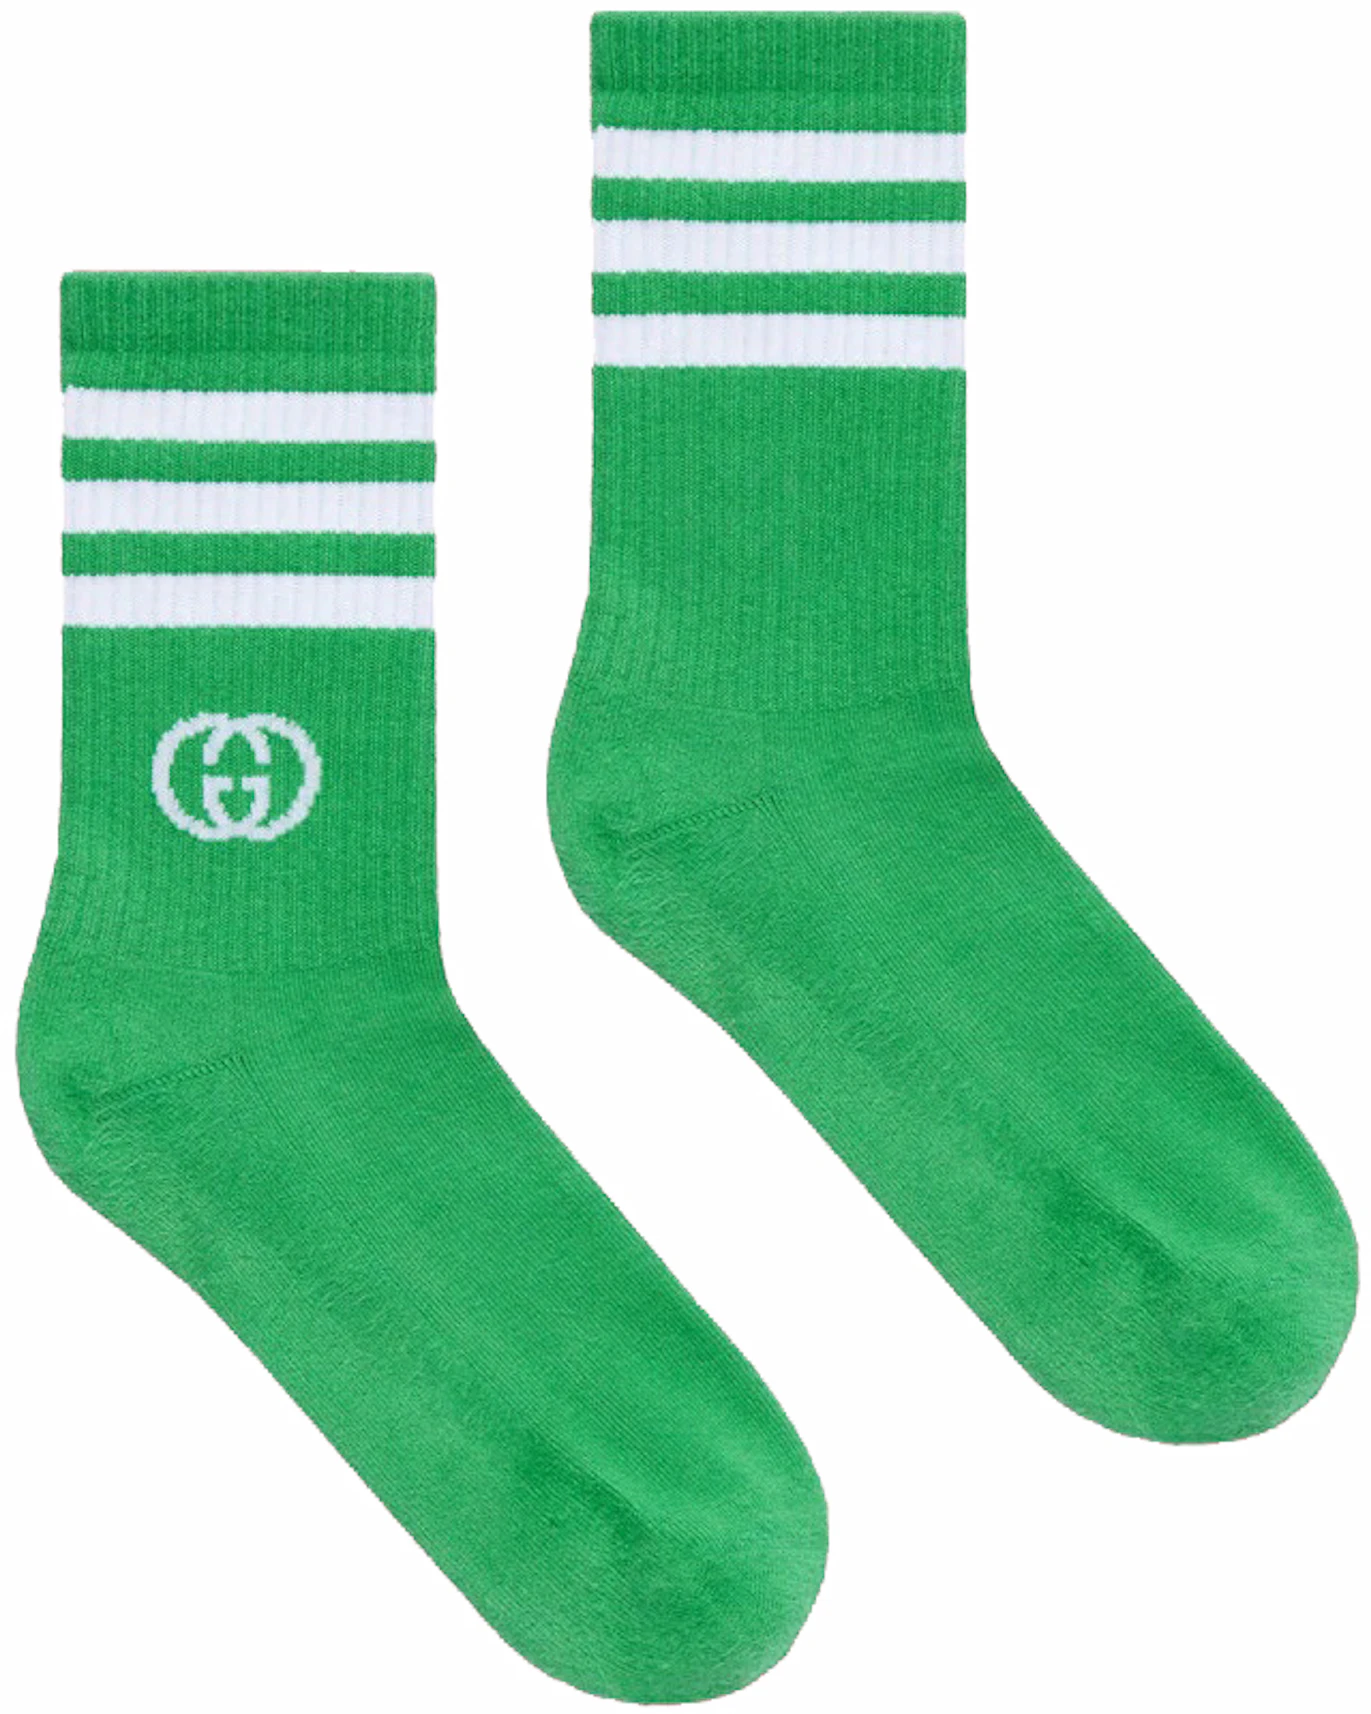 Gucci x adidas Ankle Socks Green/White - SS22 - US